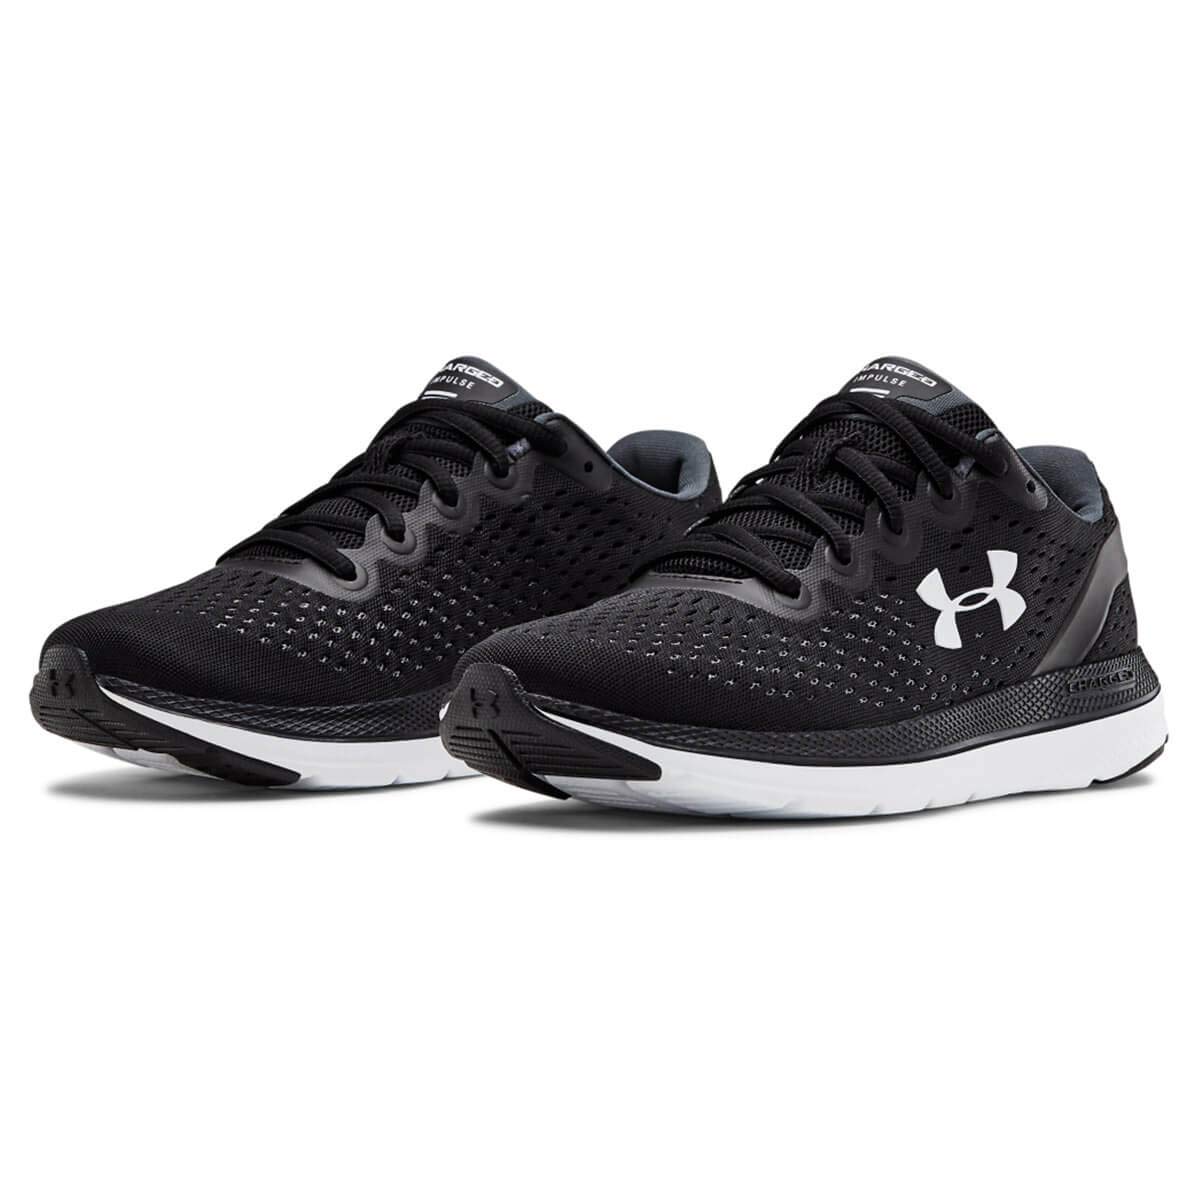 Under Armour Women's UA Charged Impulse Running Shoes 6.5 Black